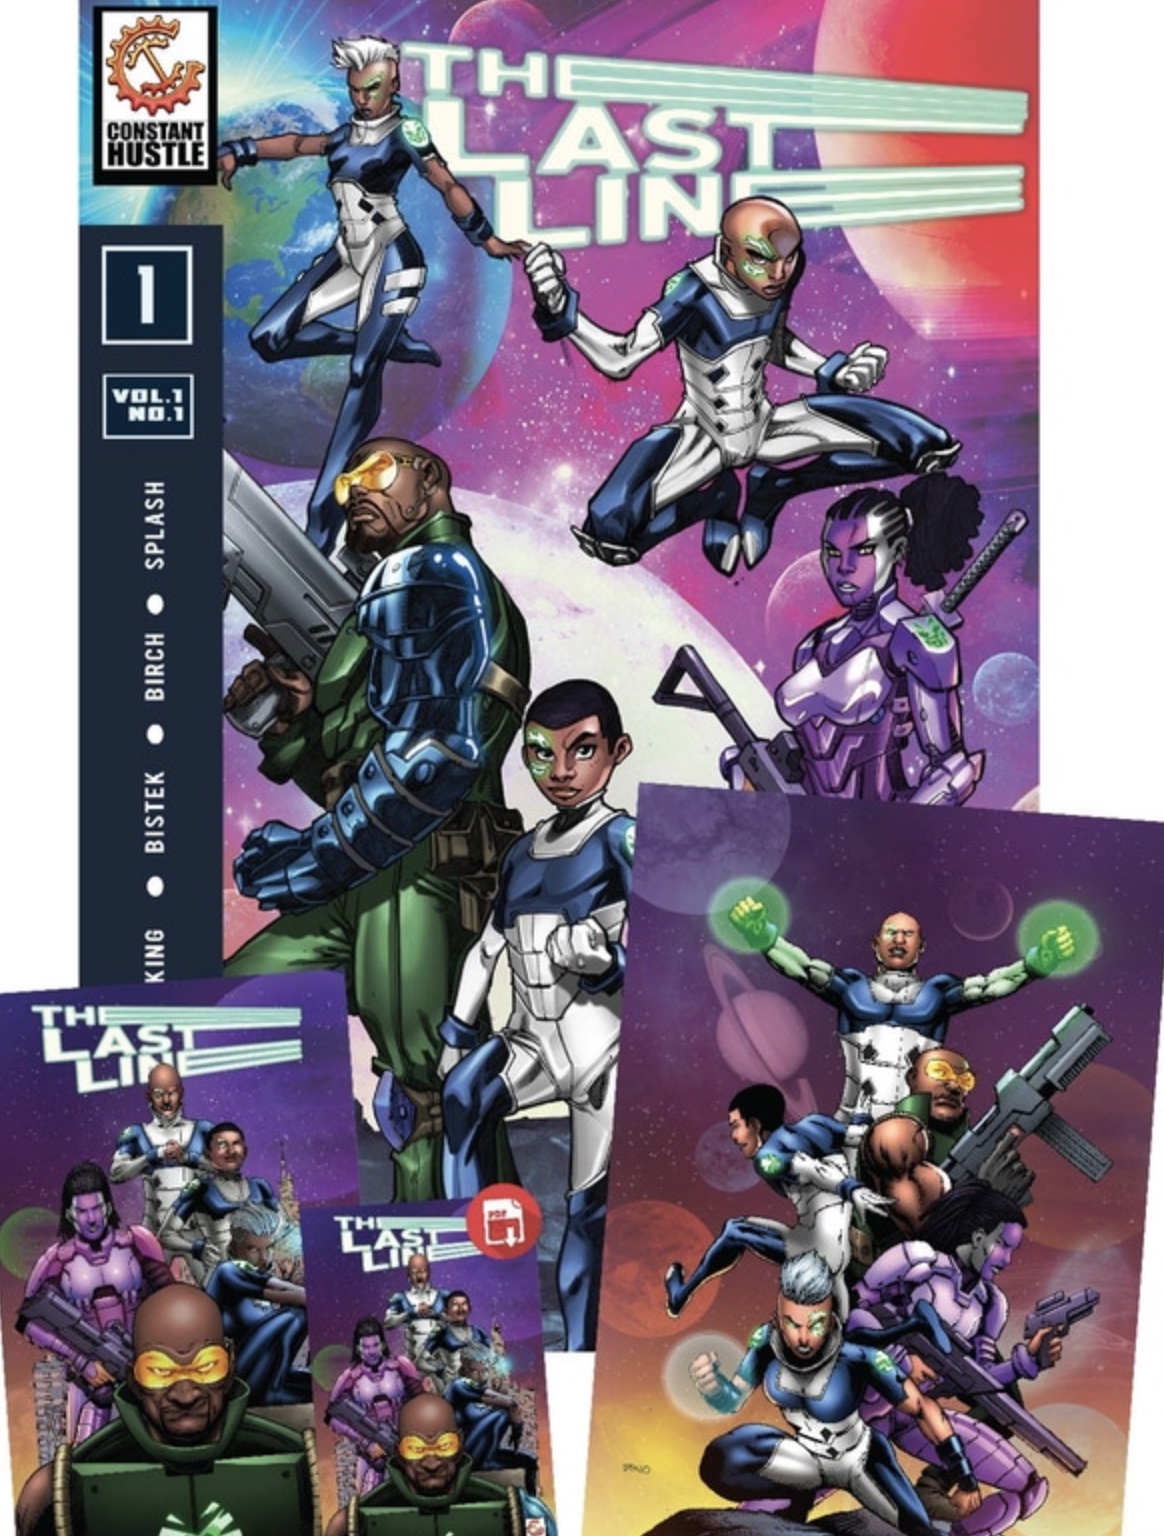 The Last Line #1 In a world where heroes & villains no longer exist, the Sihls family scour the Earth for powers in order to make themselves superheroes